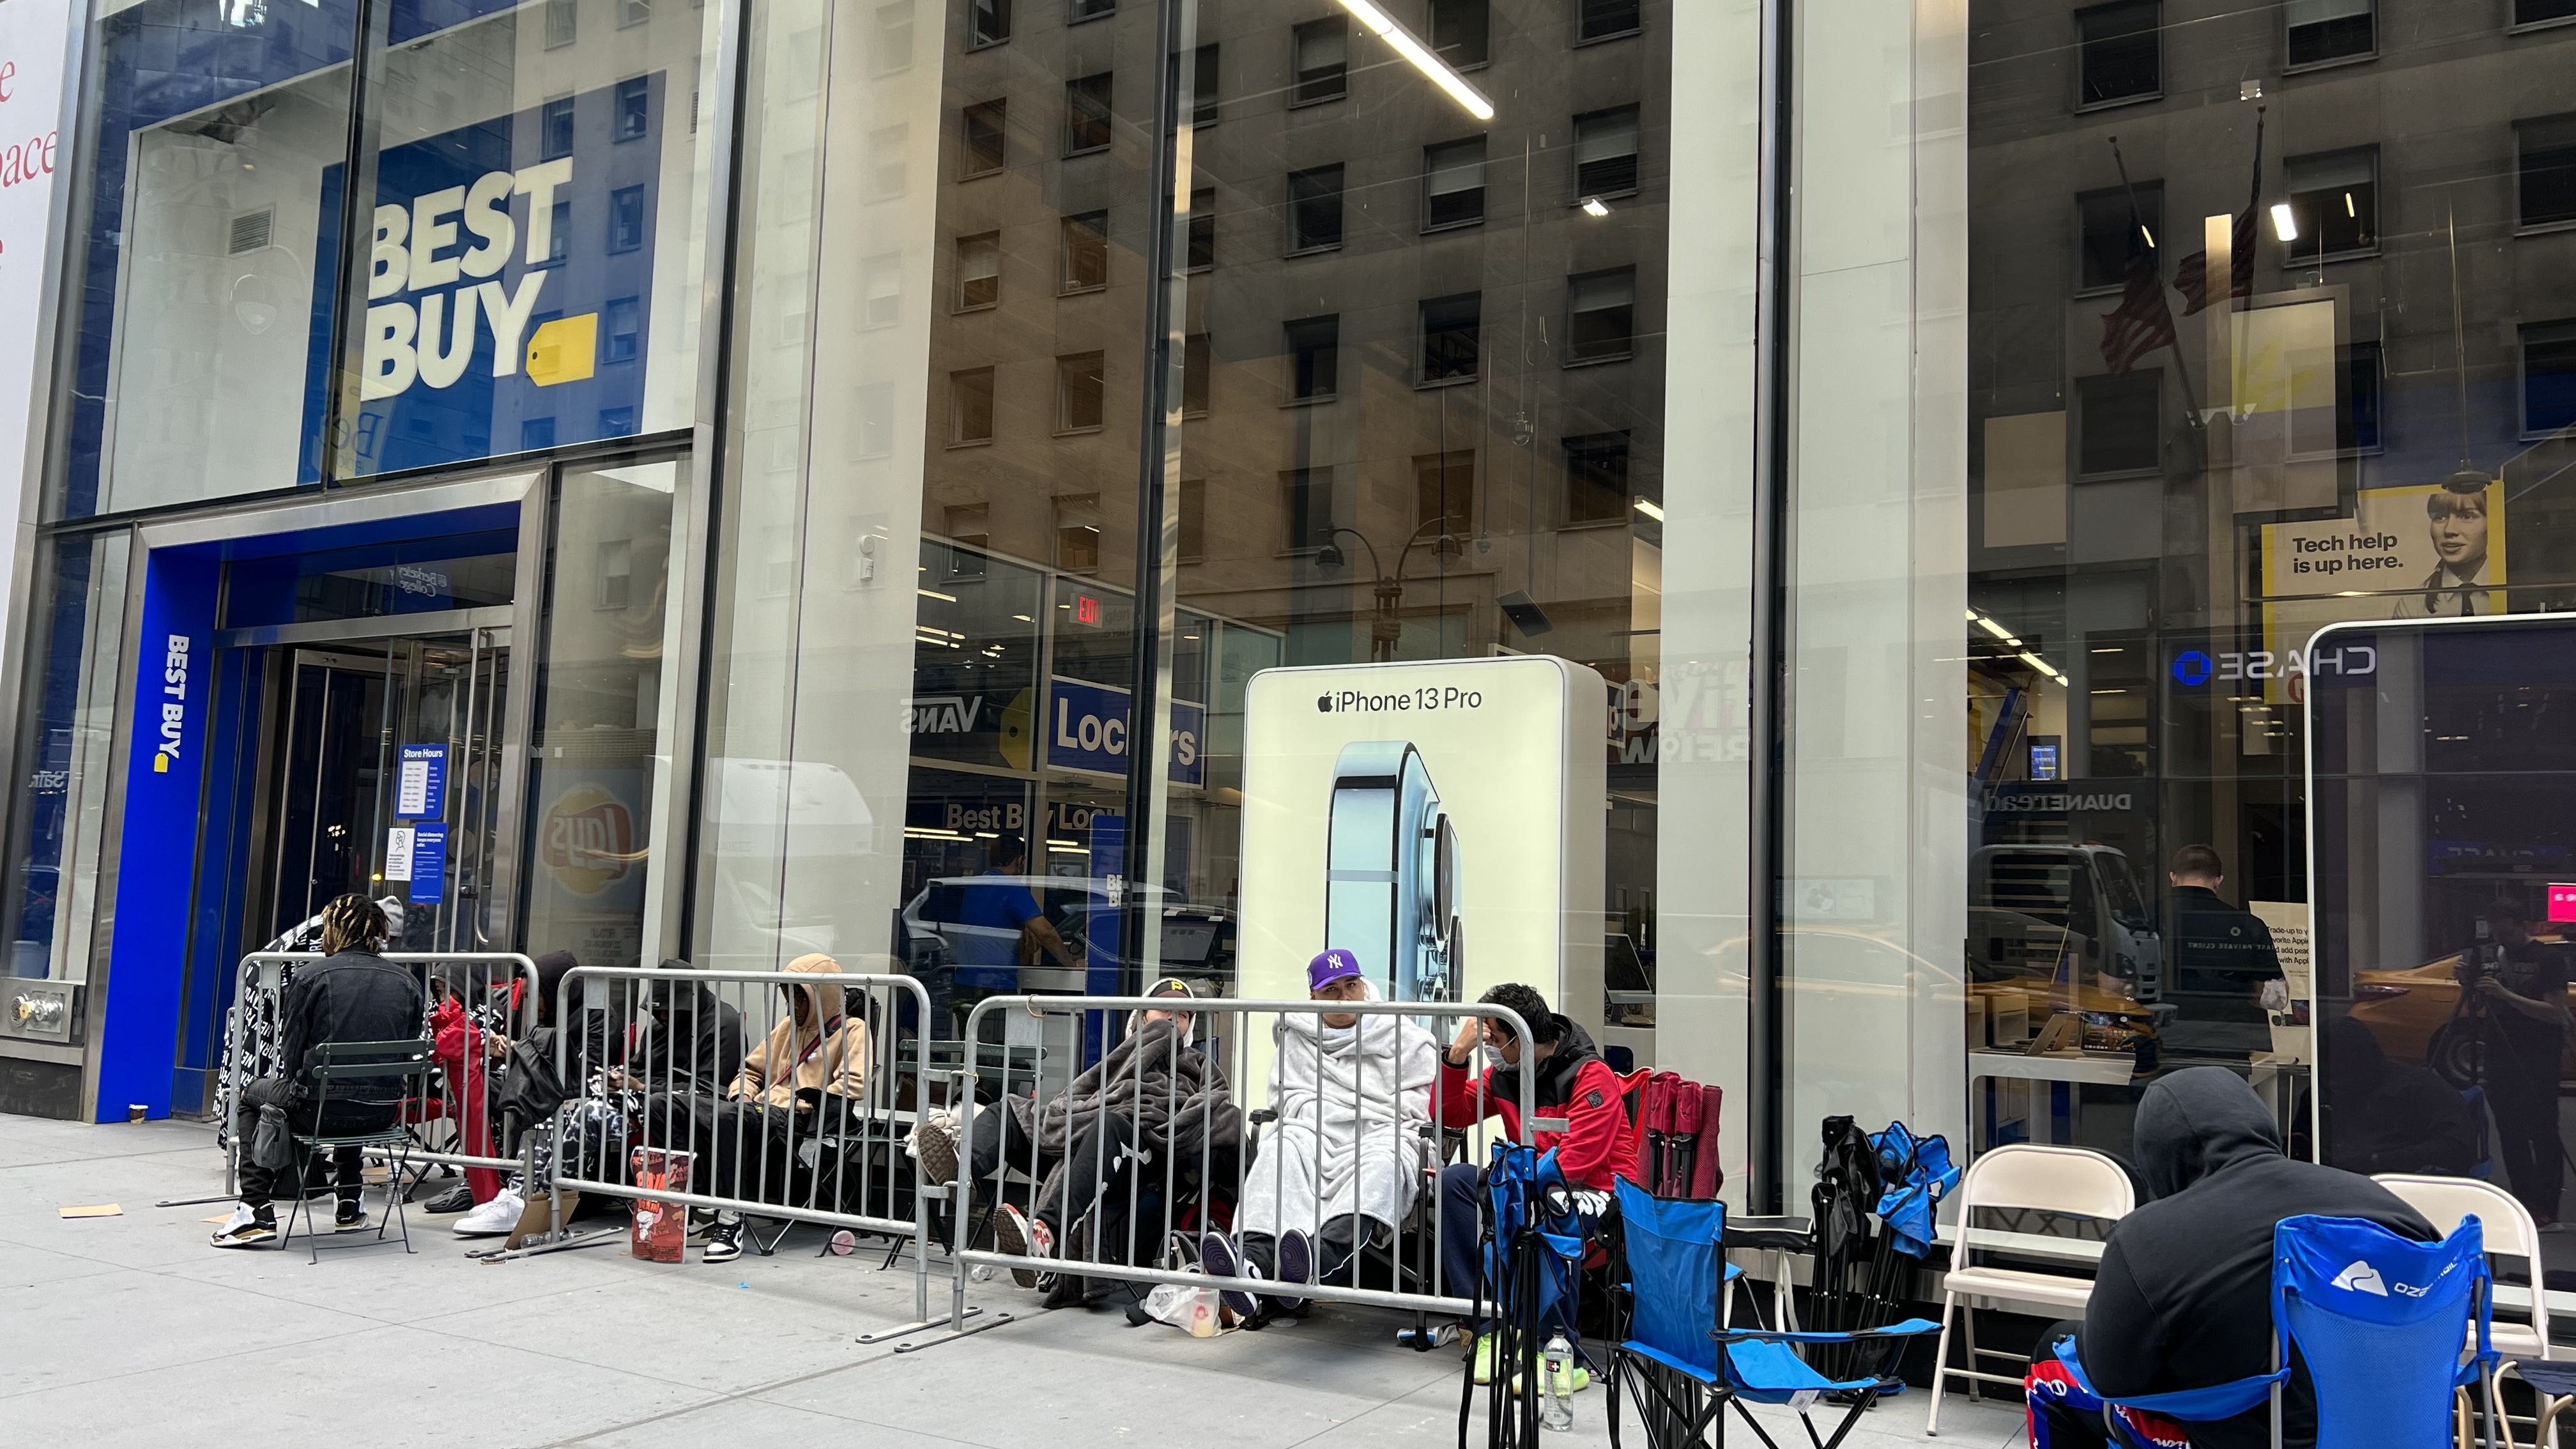 People in New York City line up to buy new graphics cards from Best Buy